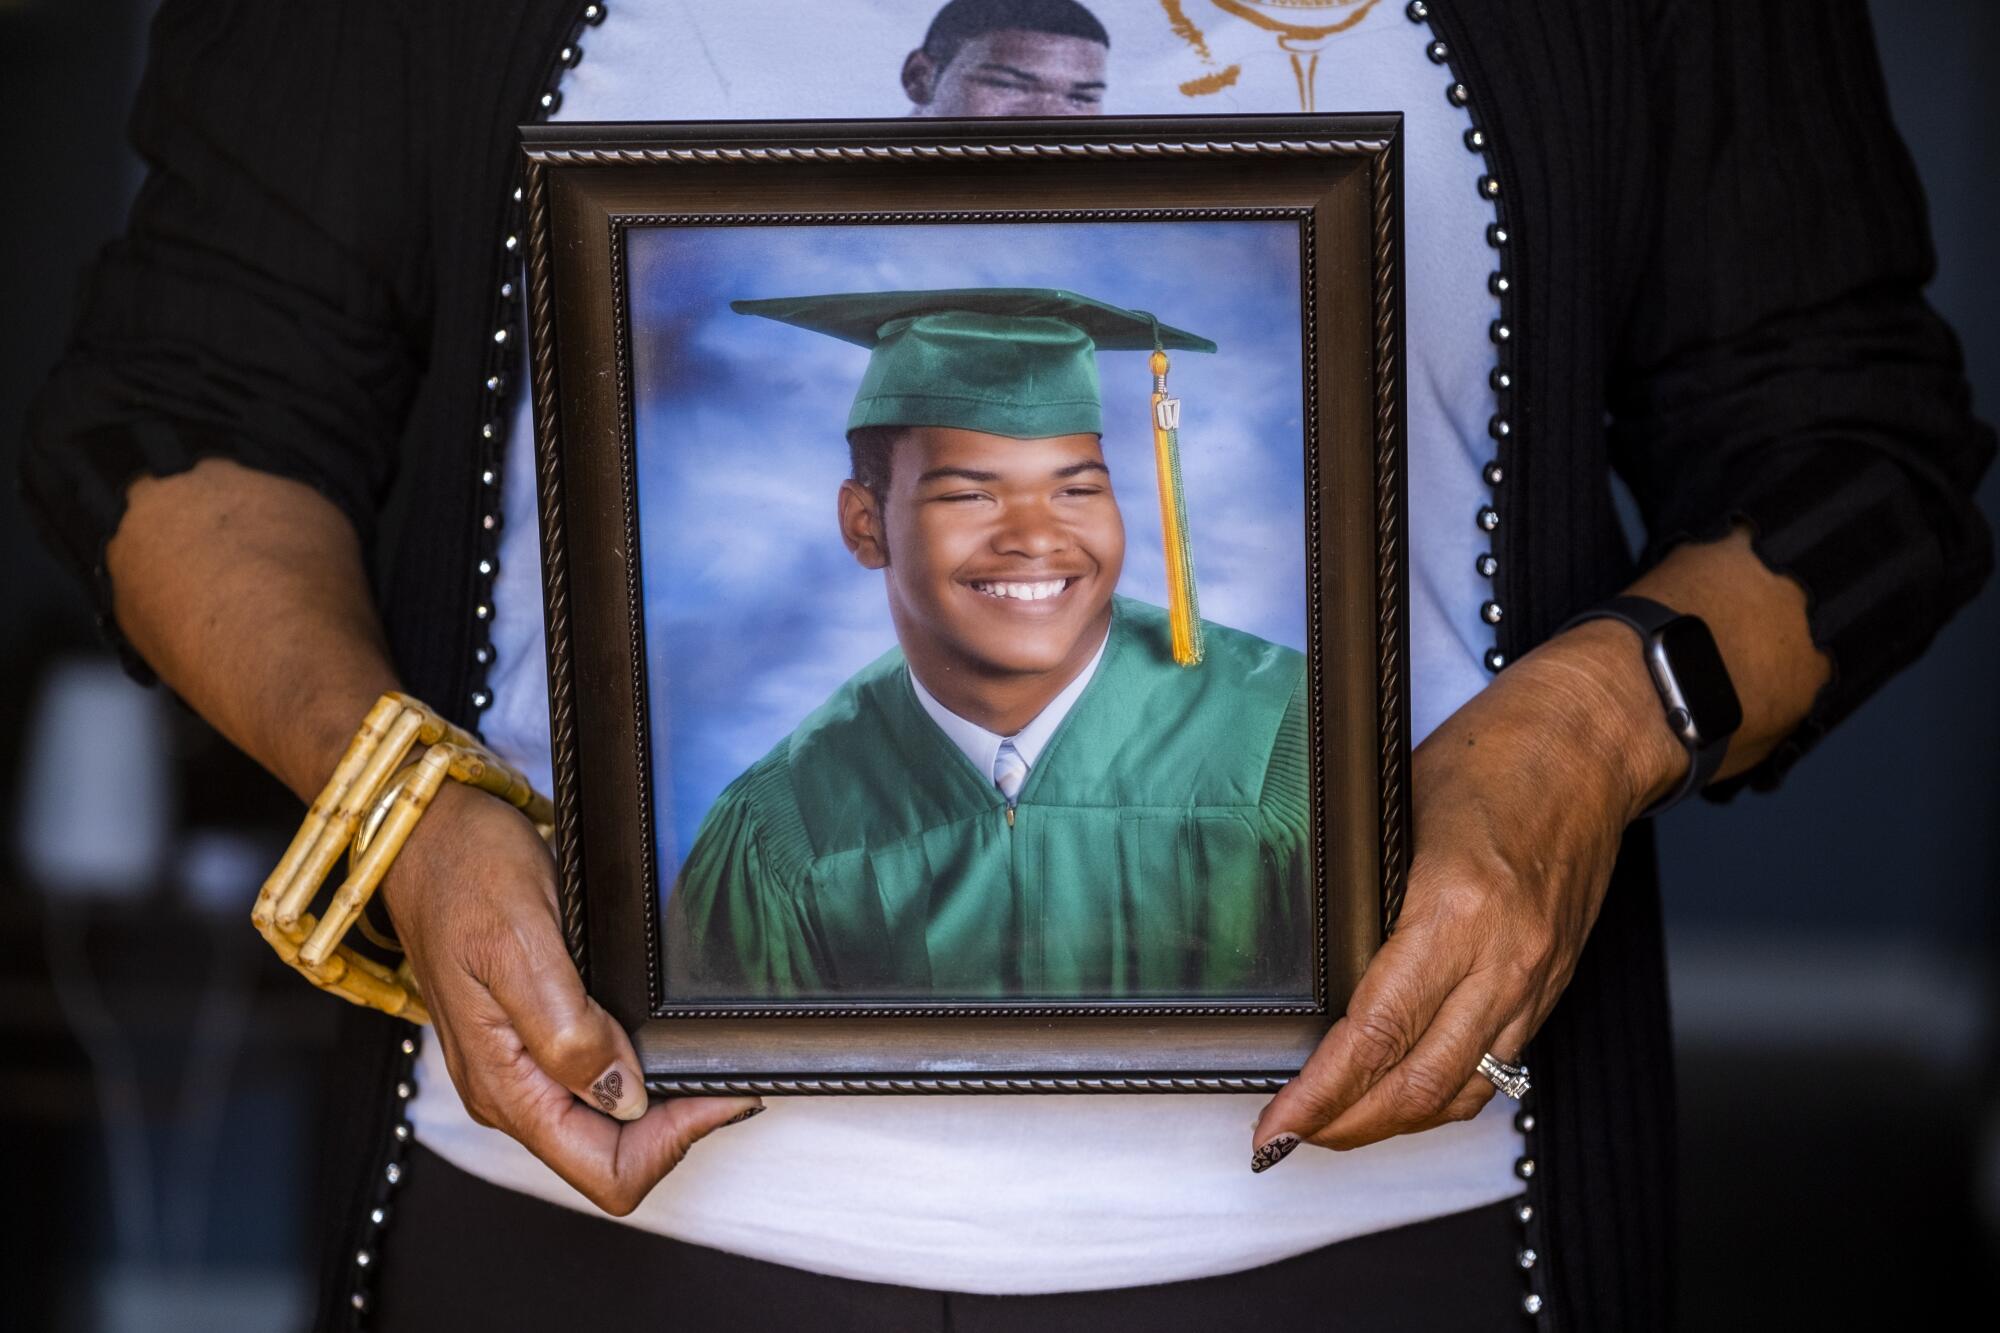 Hands hold a portrait of Julian Alexander in his graduation cap and gown